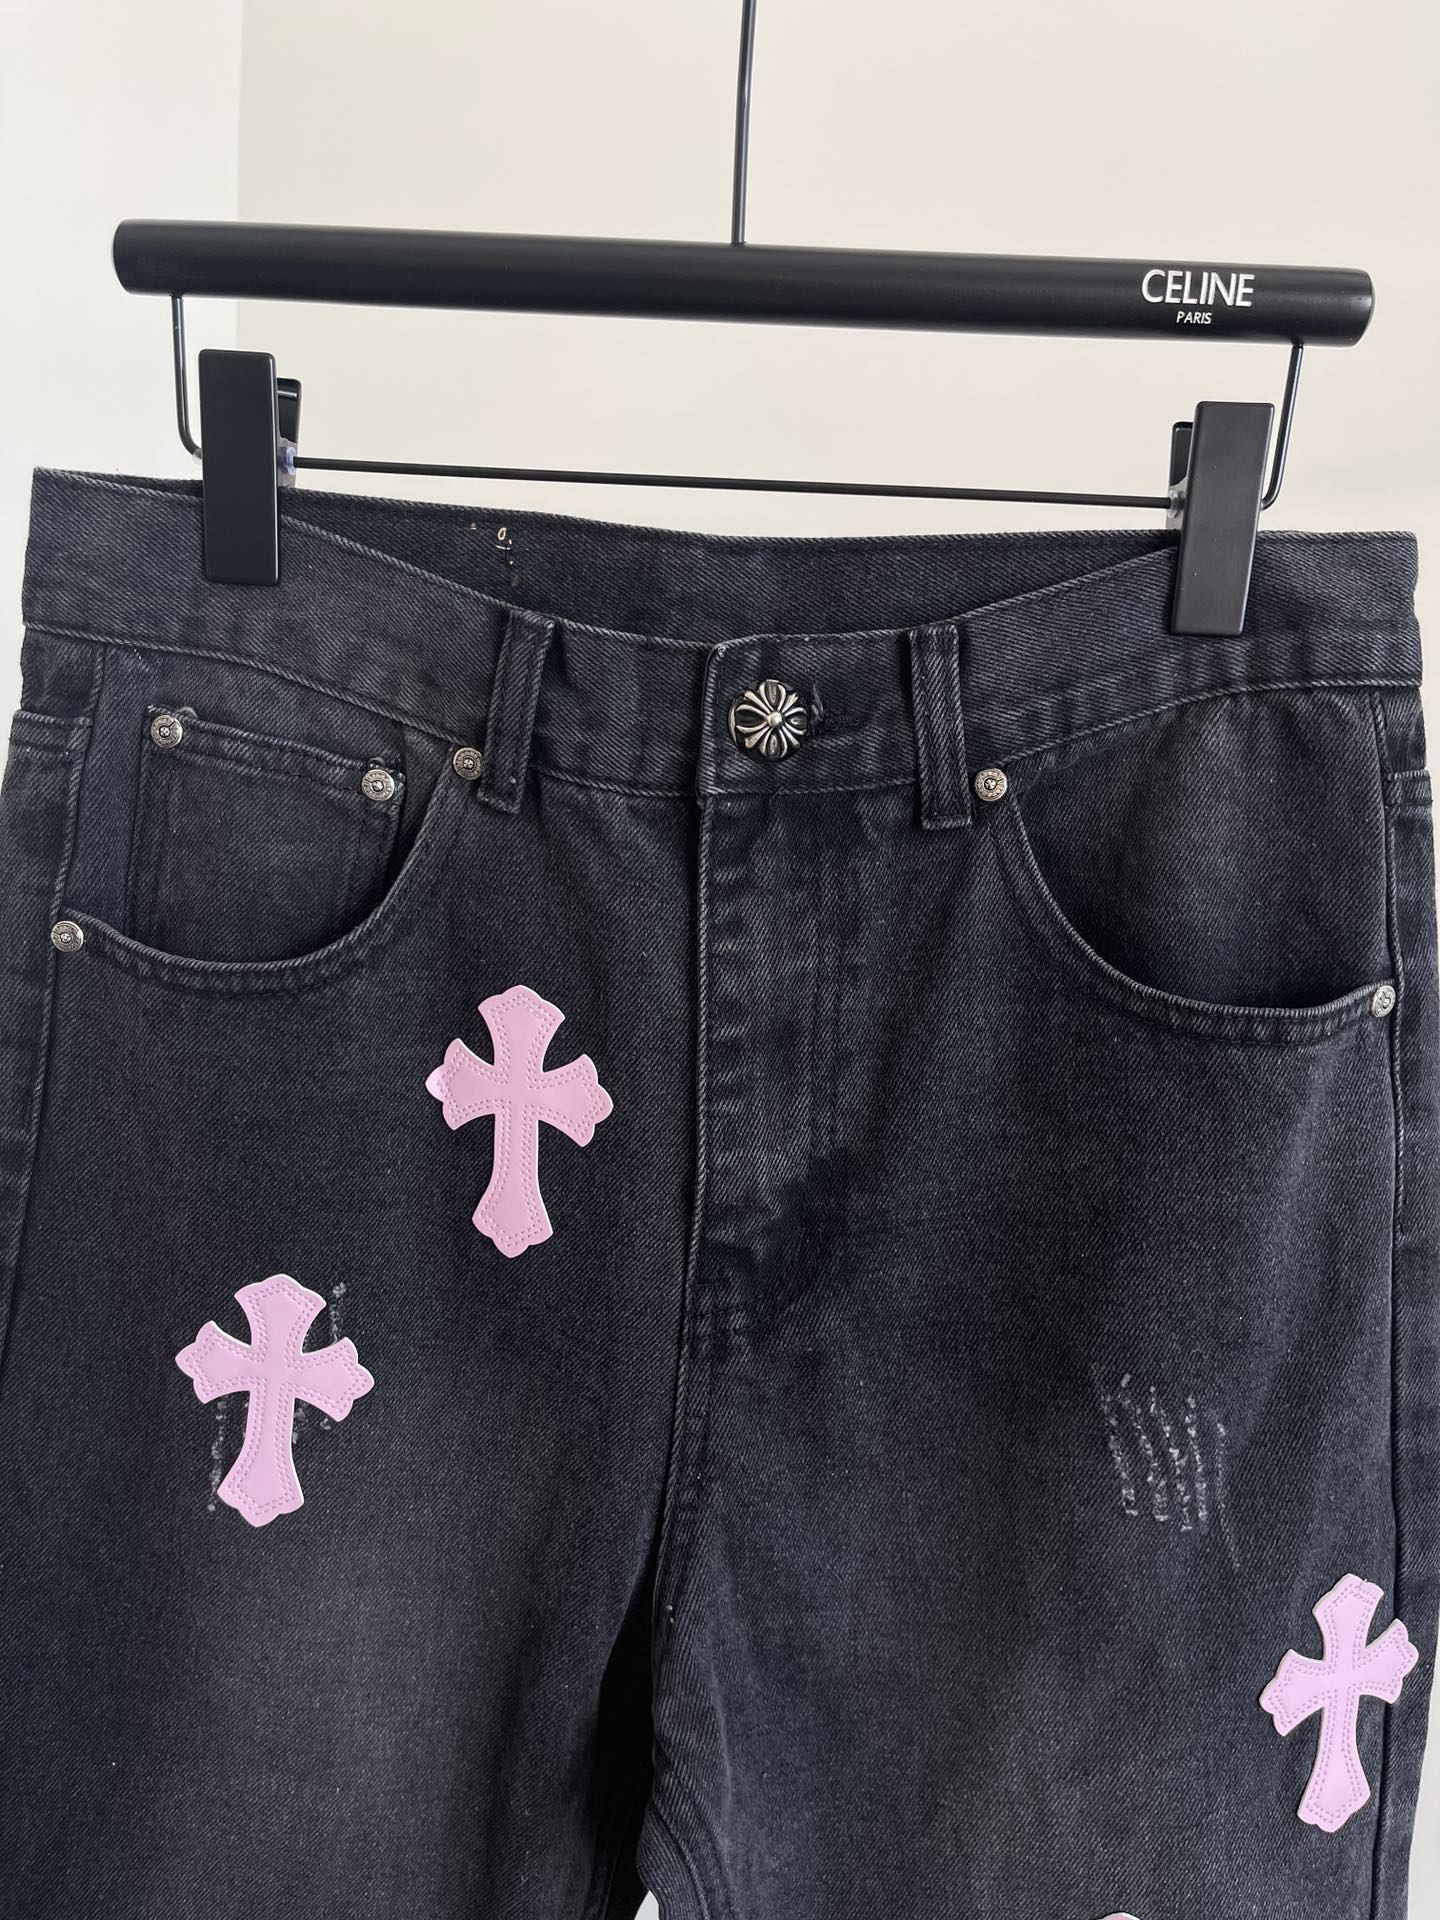 Replica Chrome Hearts 1/1 Commissioned Patchwork jeans